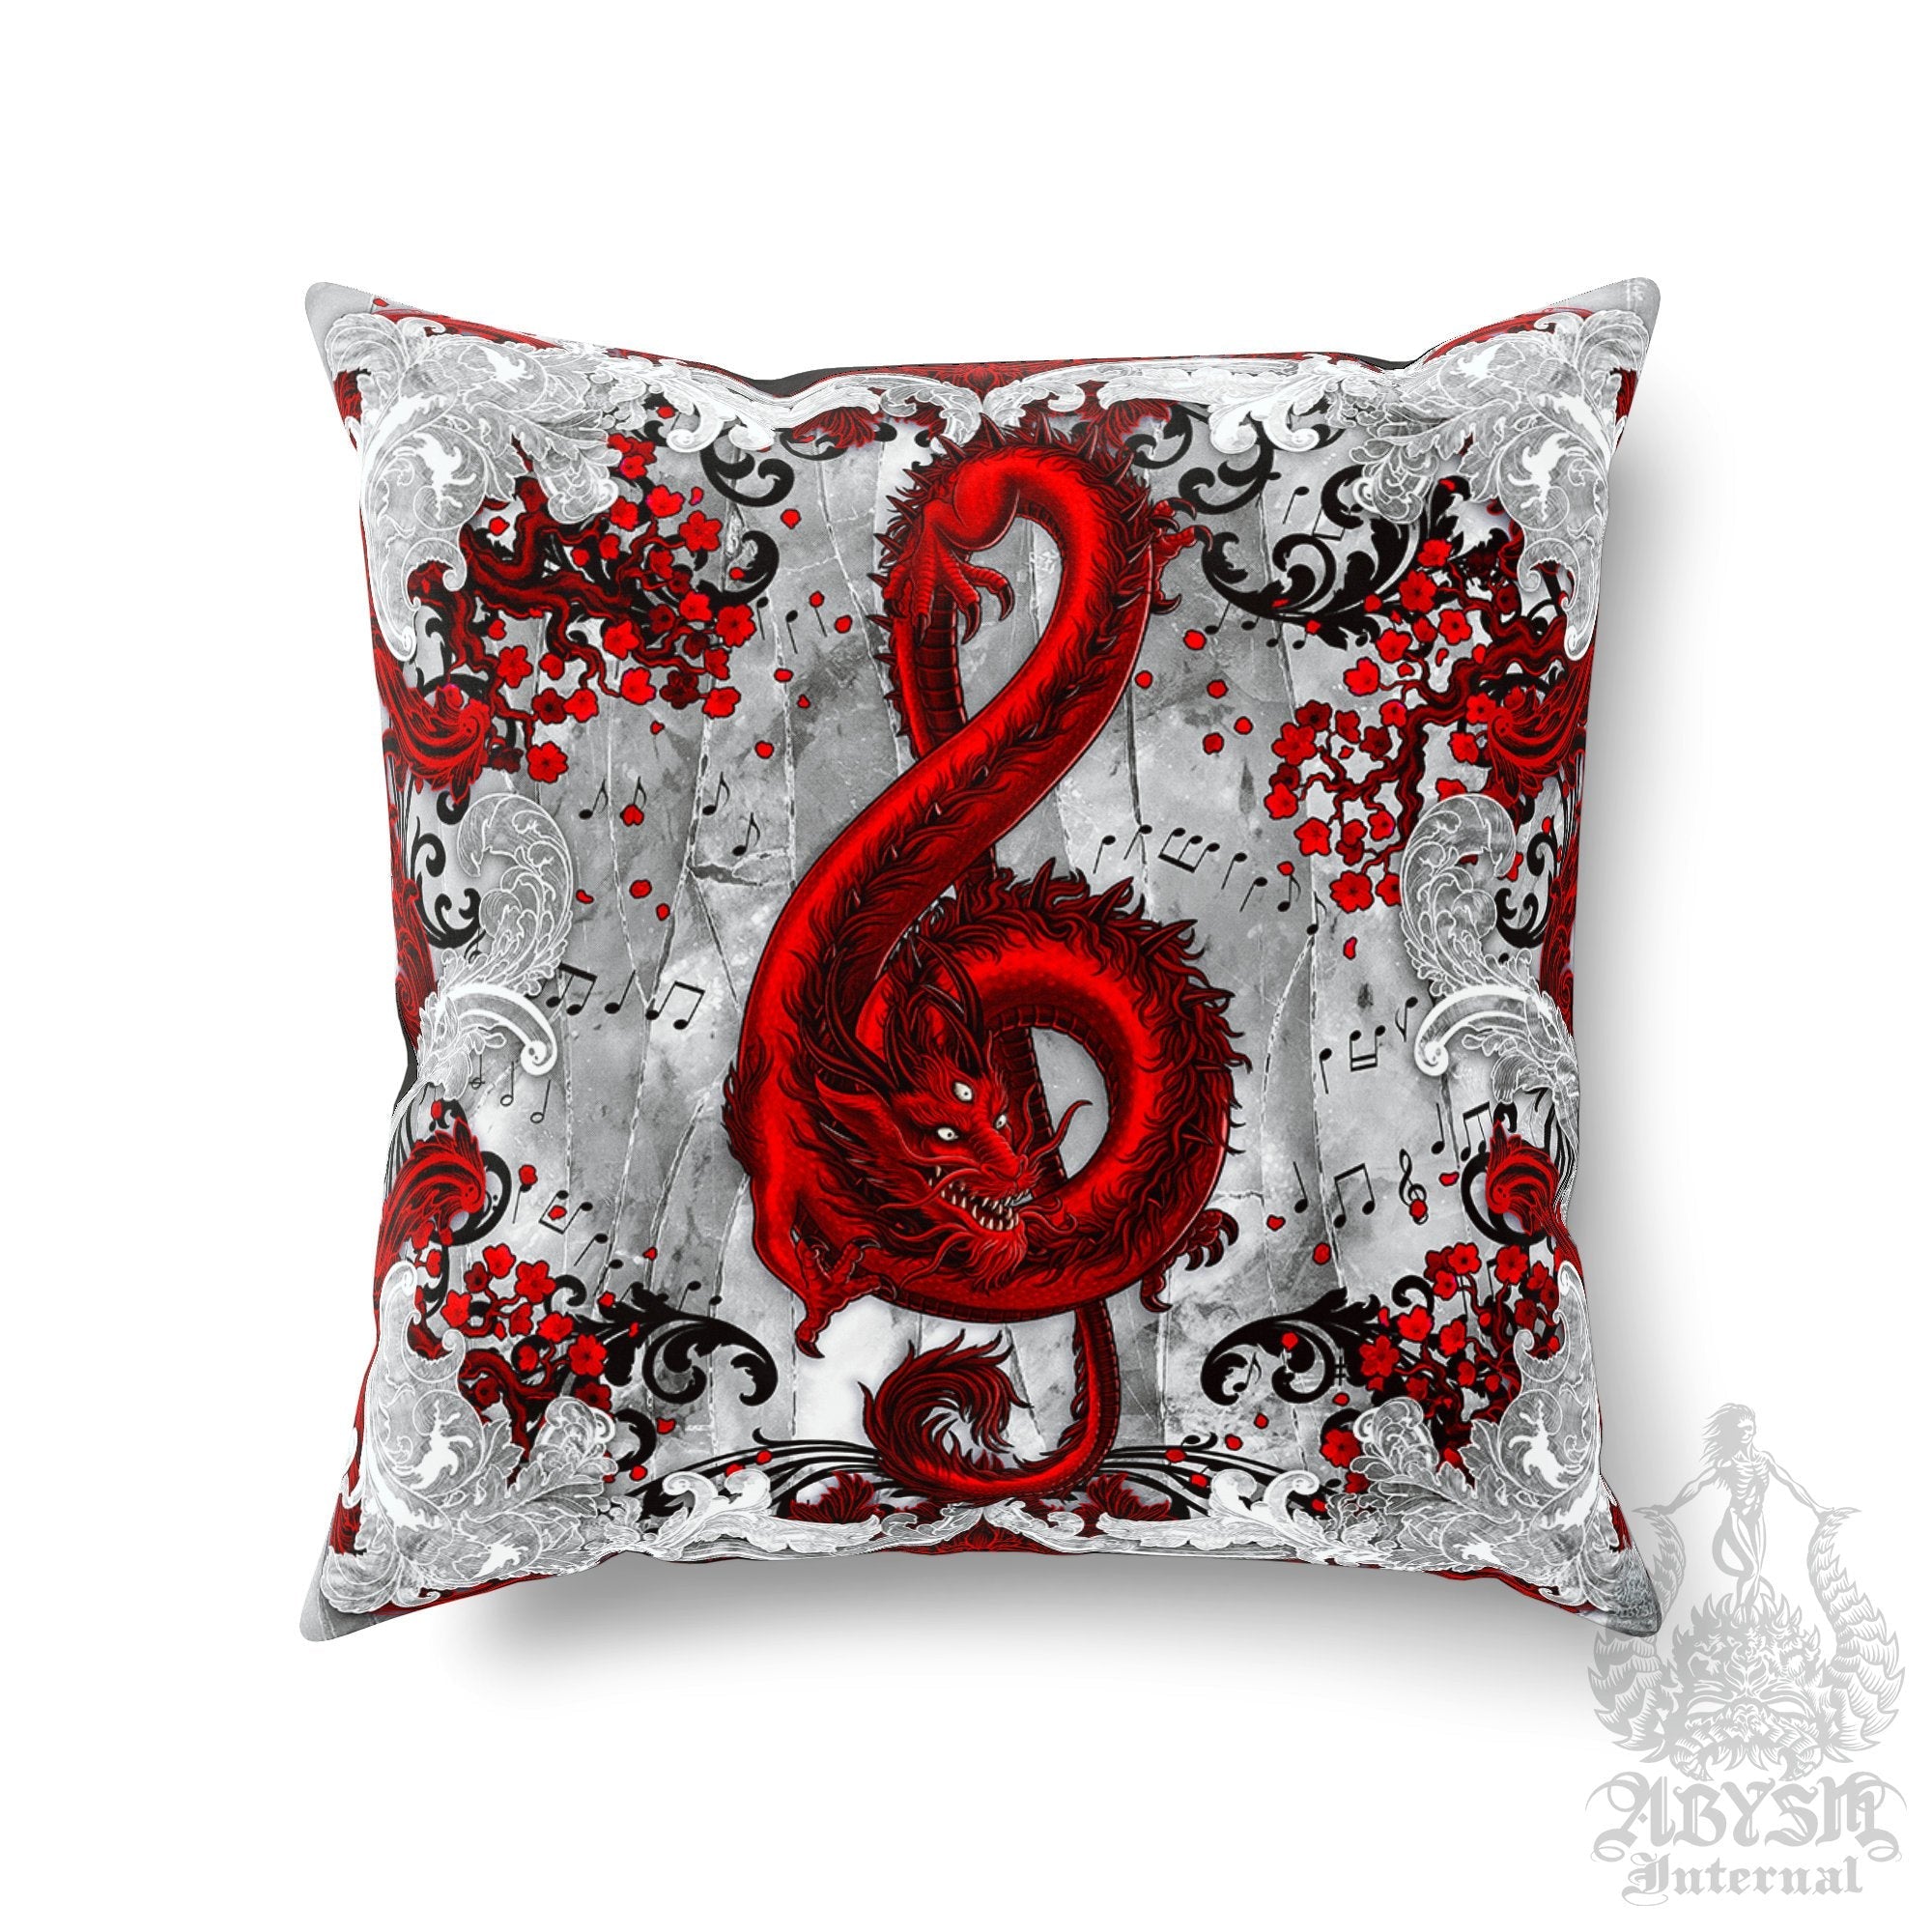 Red Dragon Throw Pillow, Decorative Accent Cushion, Gothic Room Decor, Music Art, Alternative Home - Treble Clef, Bloody White Goth - Abysm Internal